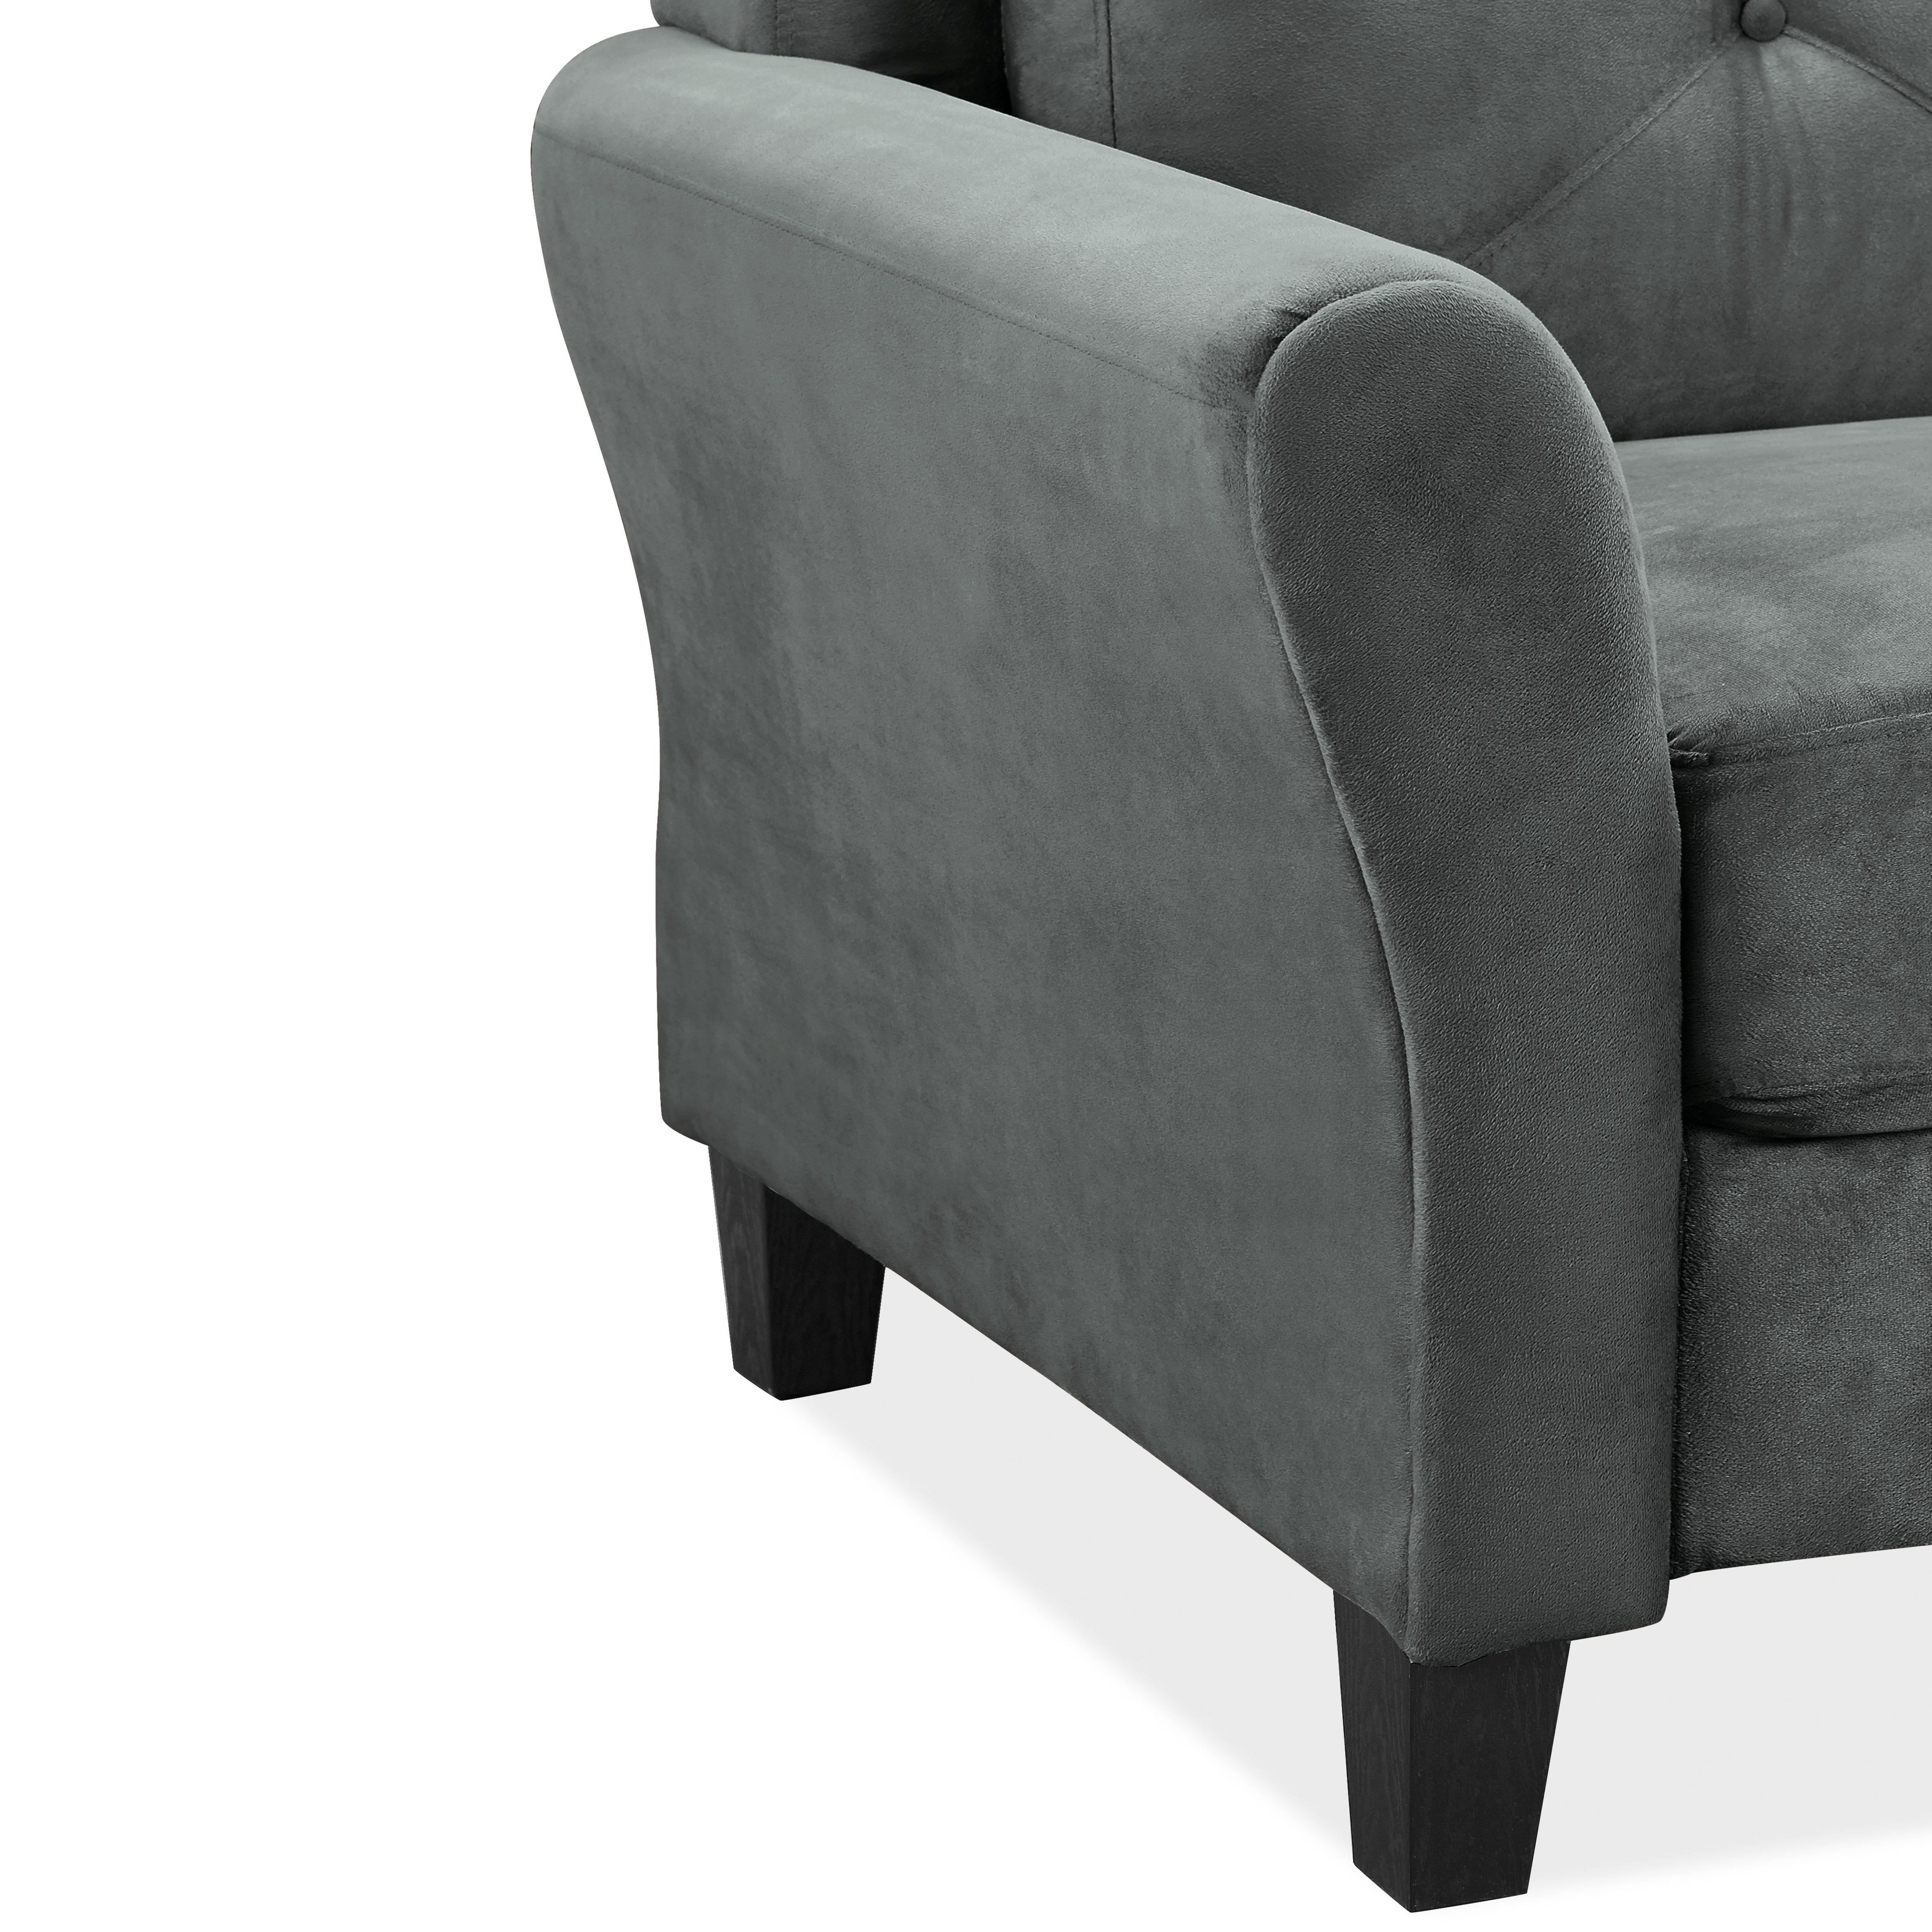 Lifestyle Solutions Taryn Traditional Sofa with Rolled Arms, Dark Gray Fabric - image 3 of 8